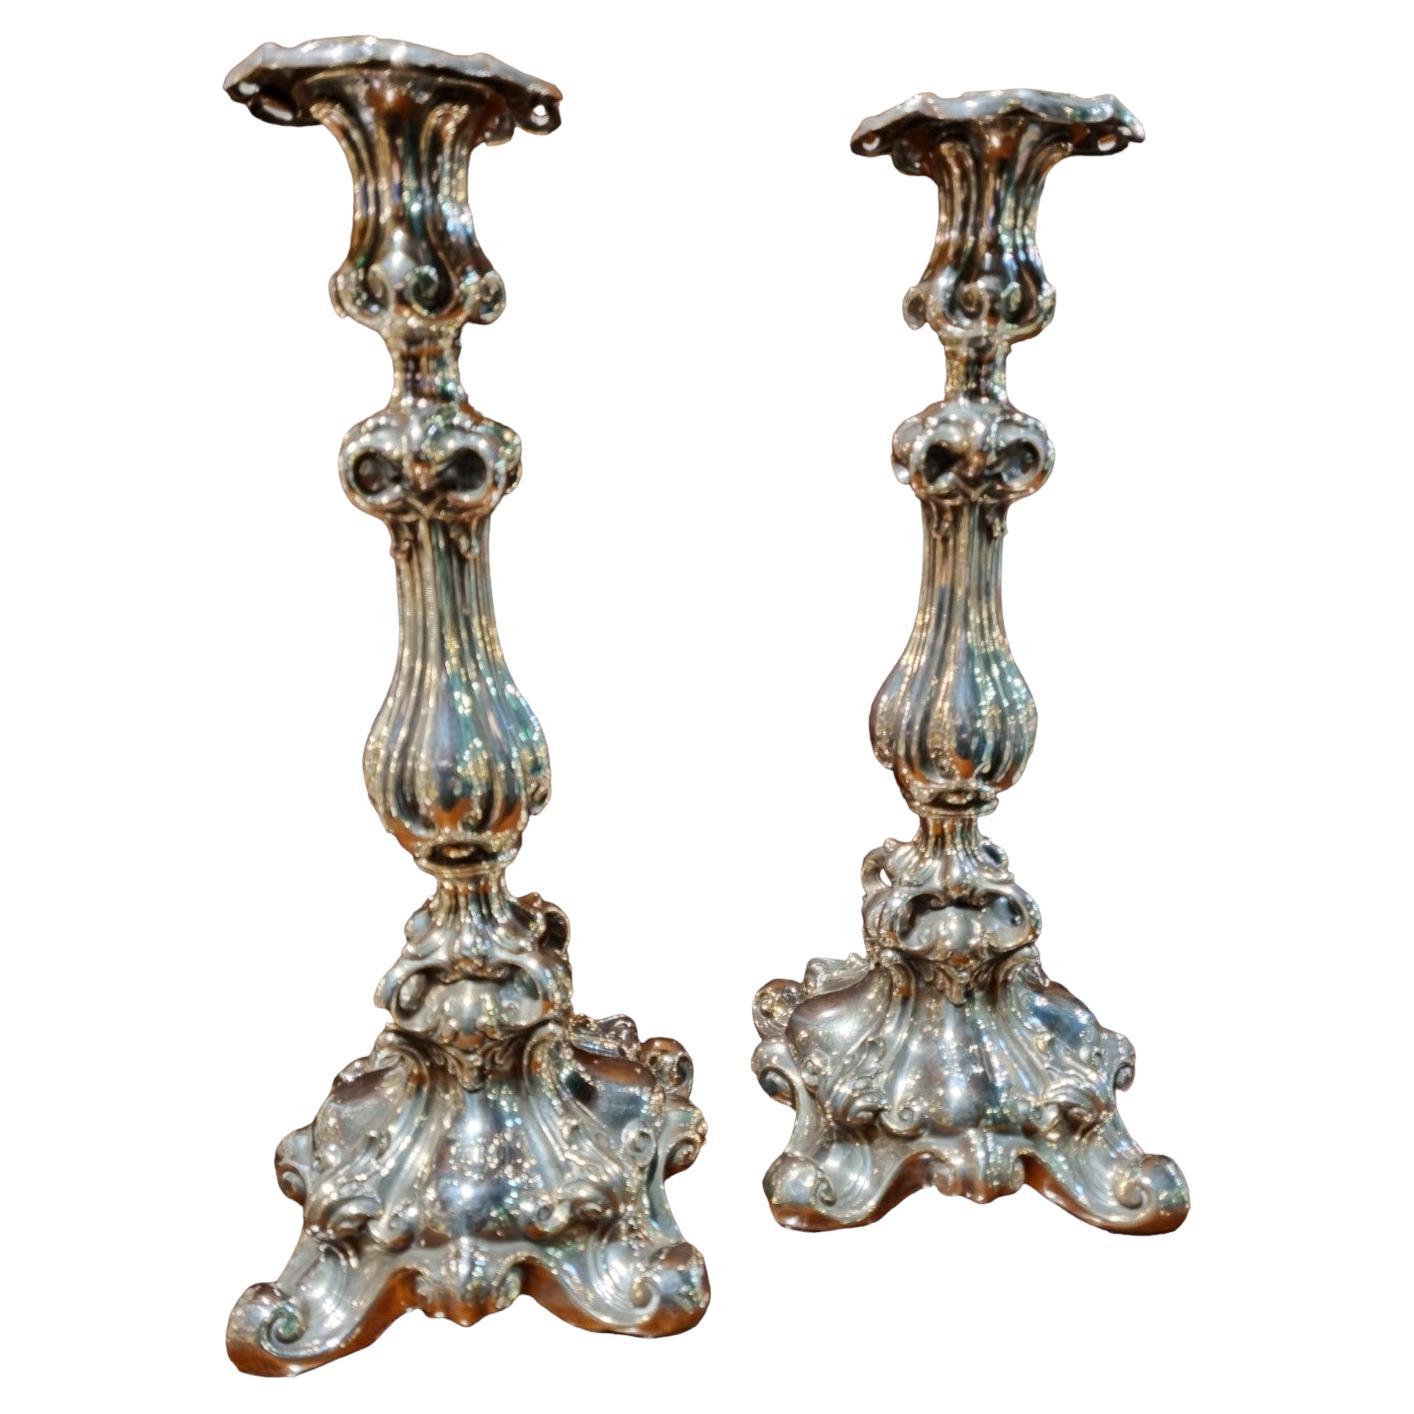 Pair of C 19th French Silver Candlesticks